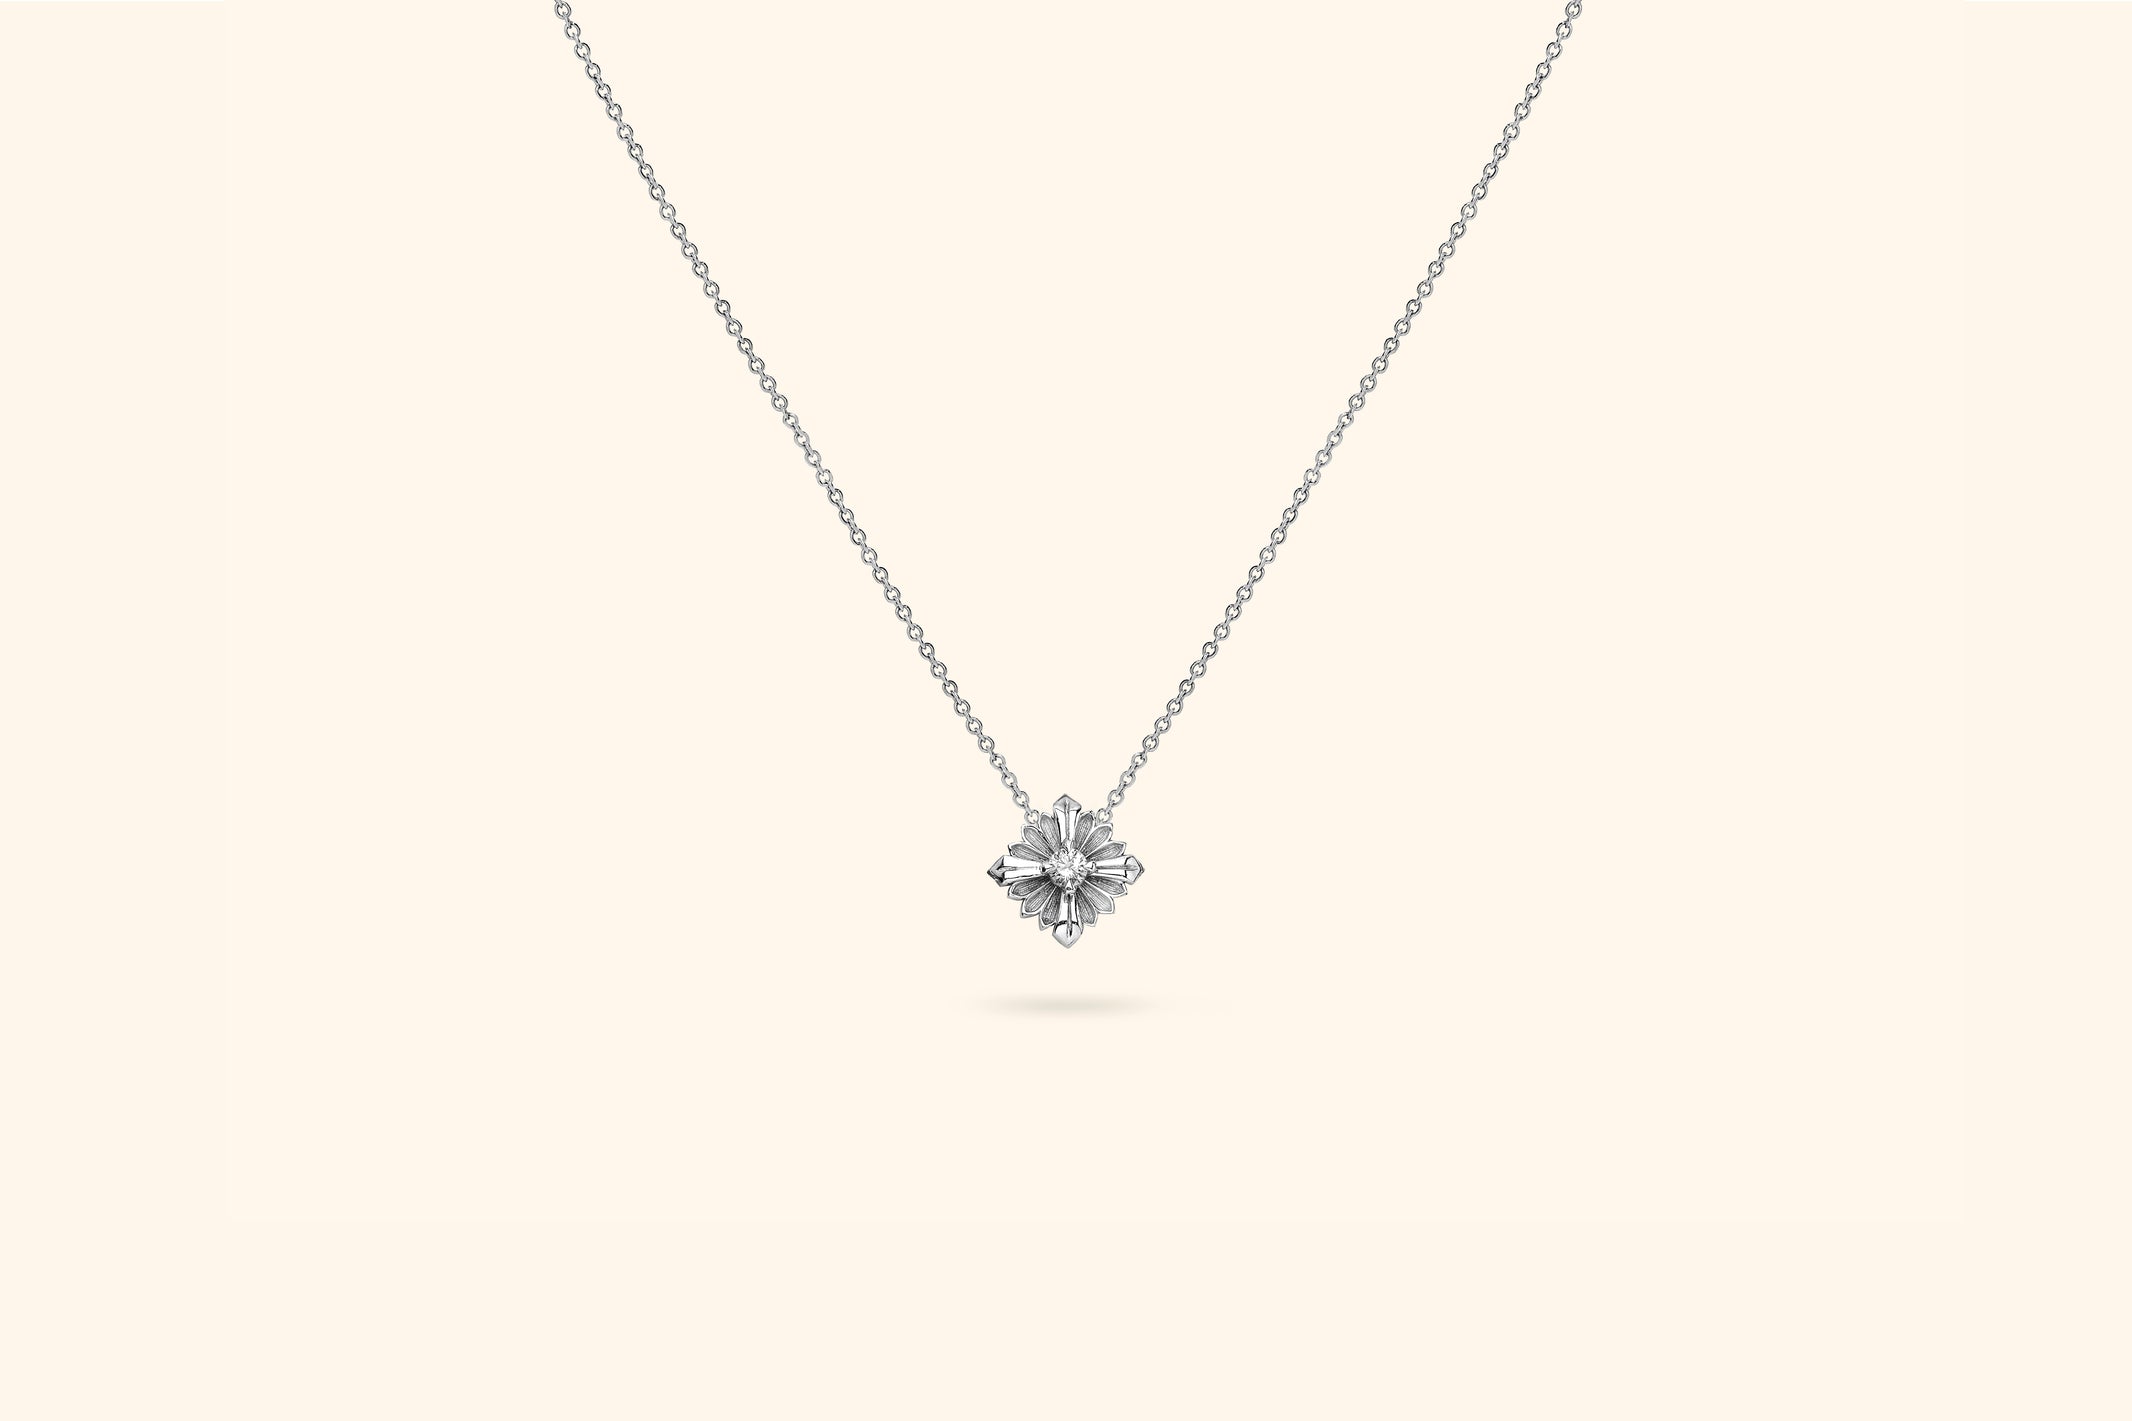 Stamp small necklace, white gold, diamond